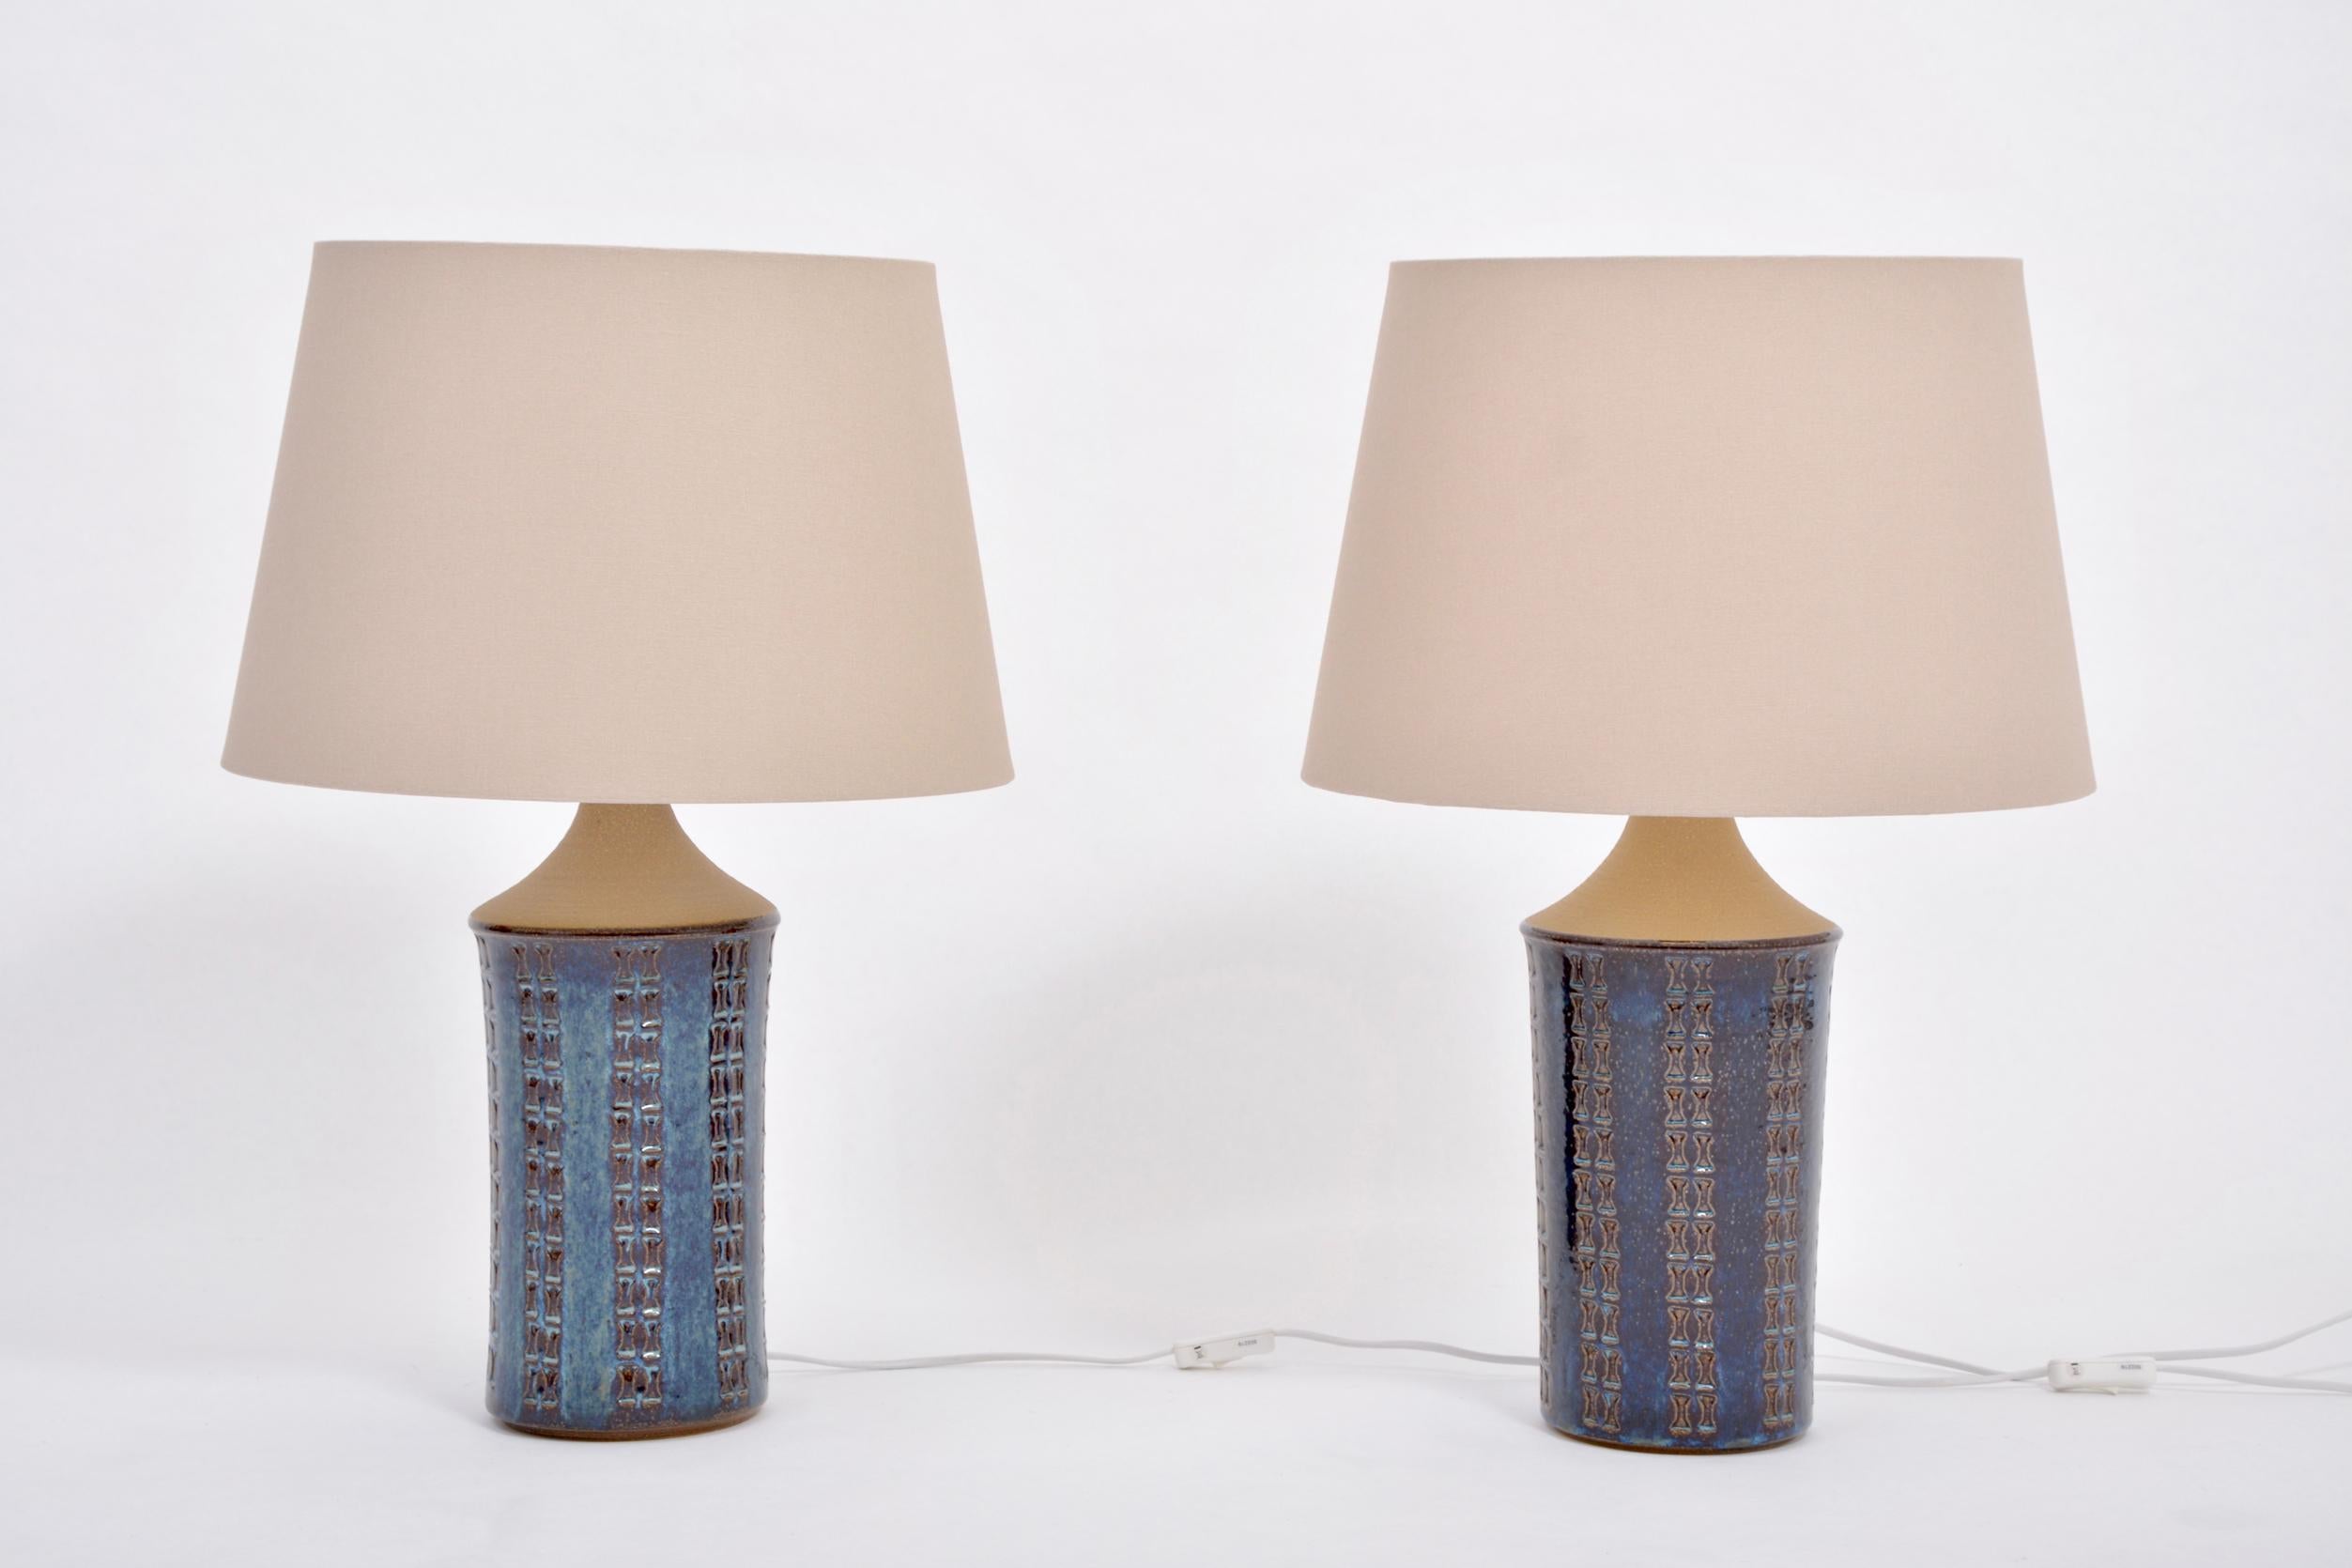 Danish Pair of Tall Blue Mid-Century Modern Table Lamps by Maria Philippi for Soholm